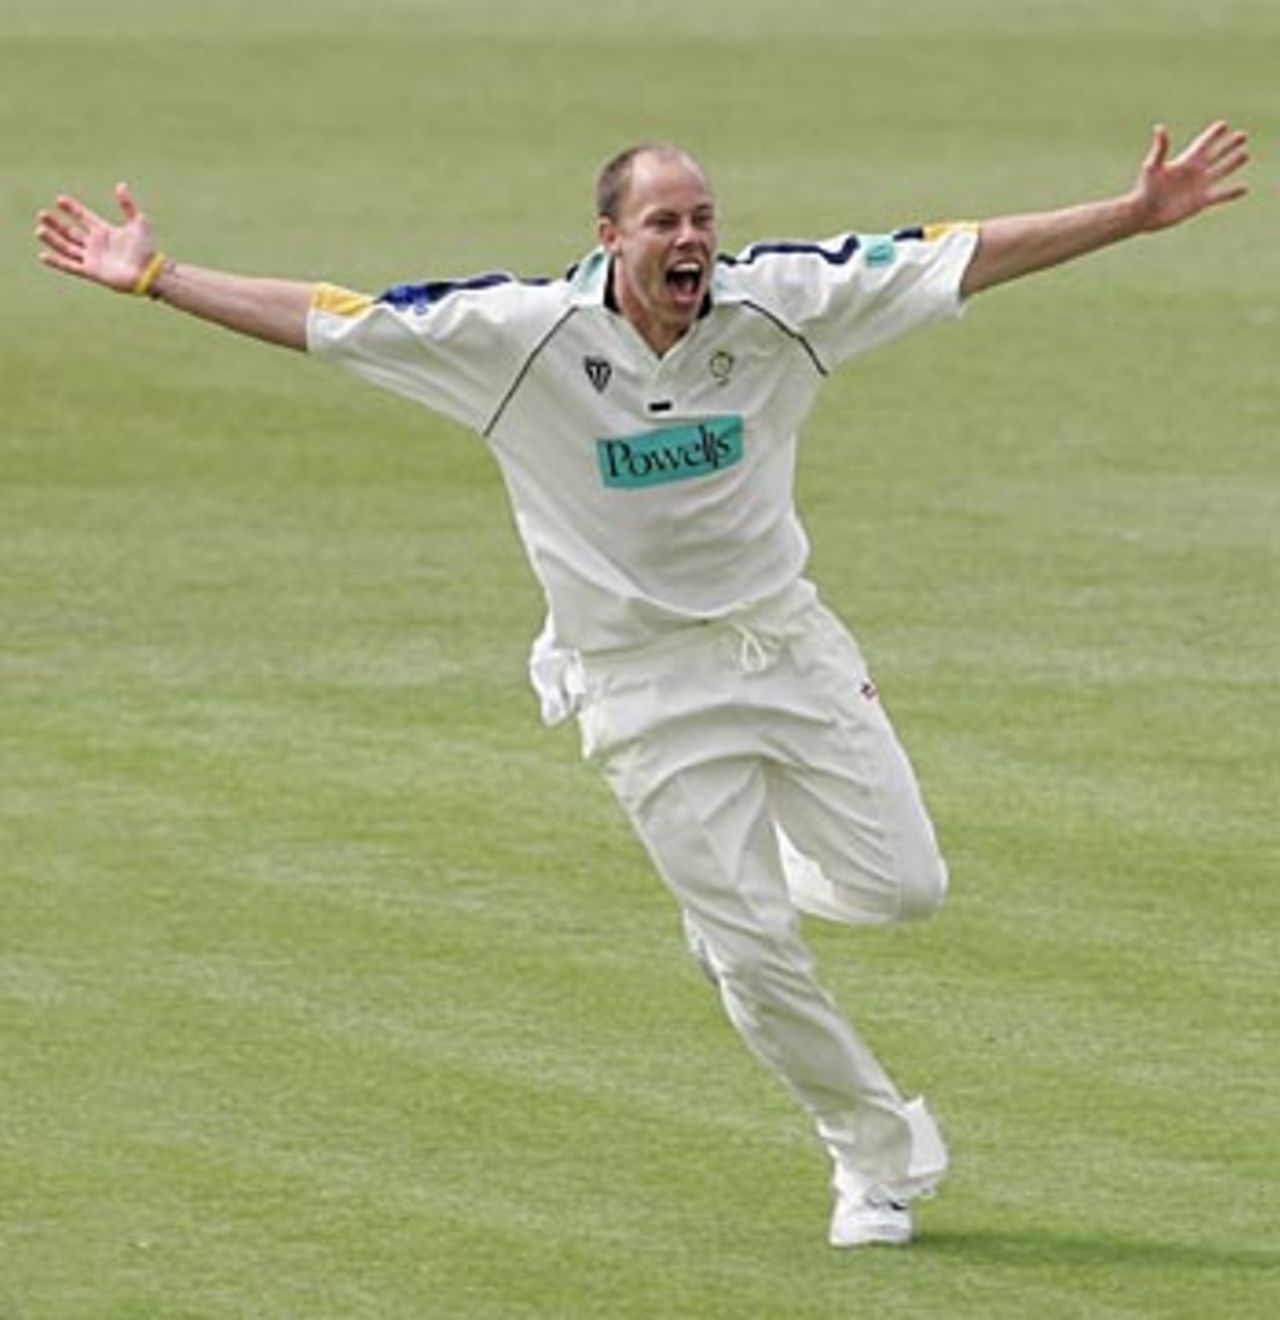 Billy Taylor roars his delight after grabbing a hat-trick to rout Middlesex for 98, Hampshire v Middlesex, Southampton, May 3, 2006